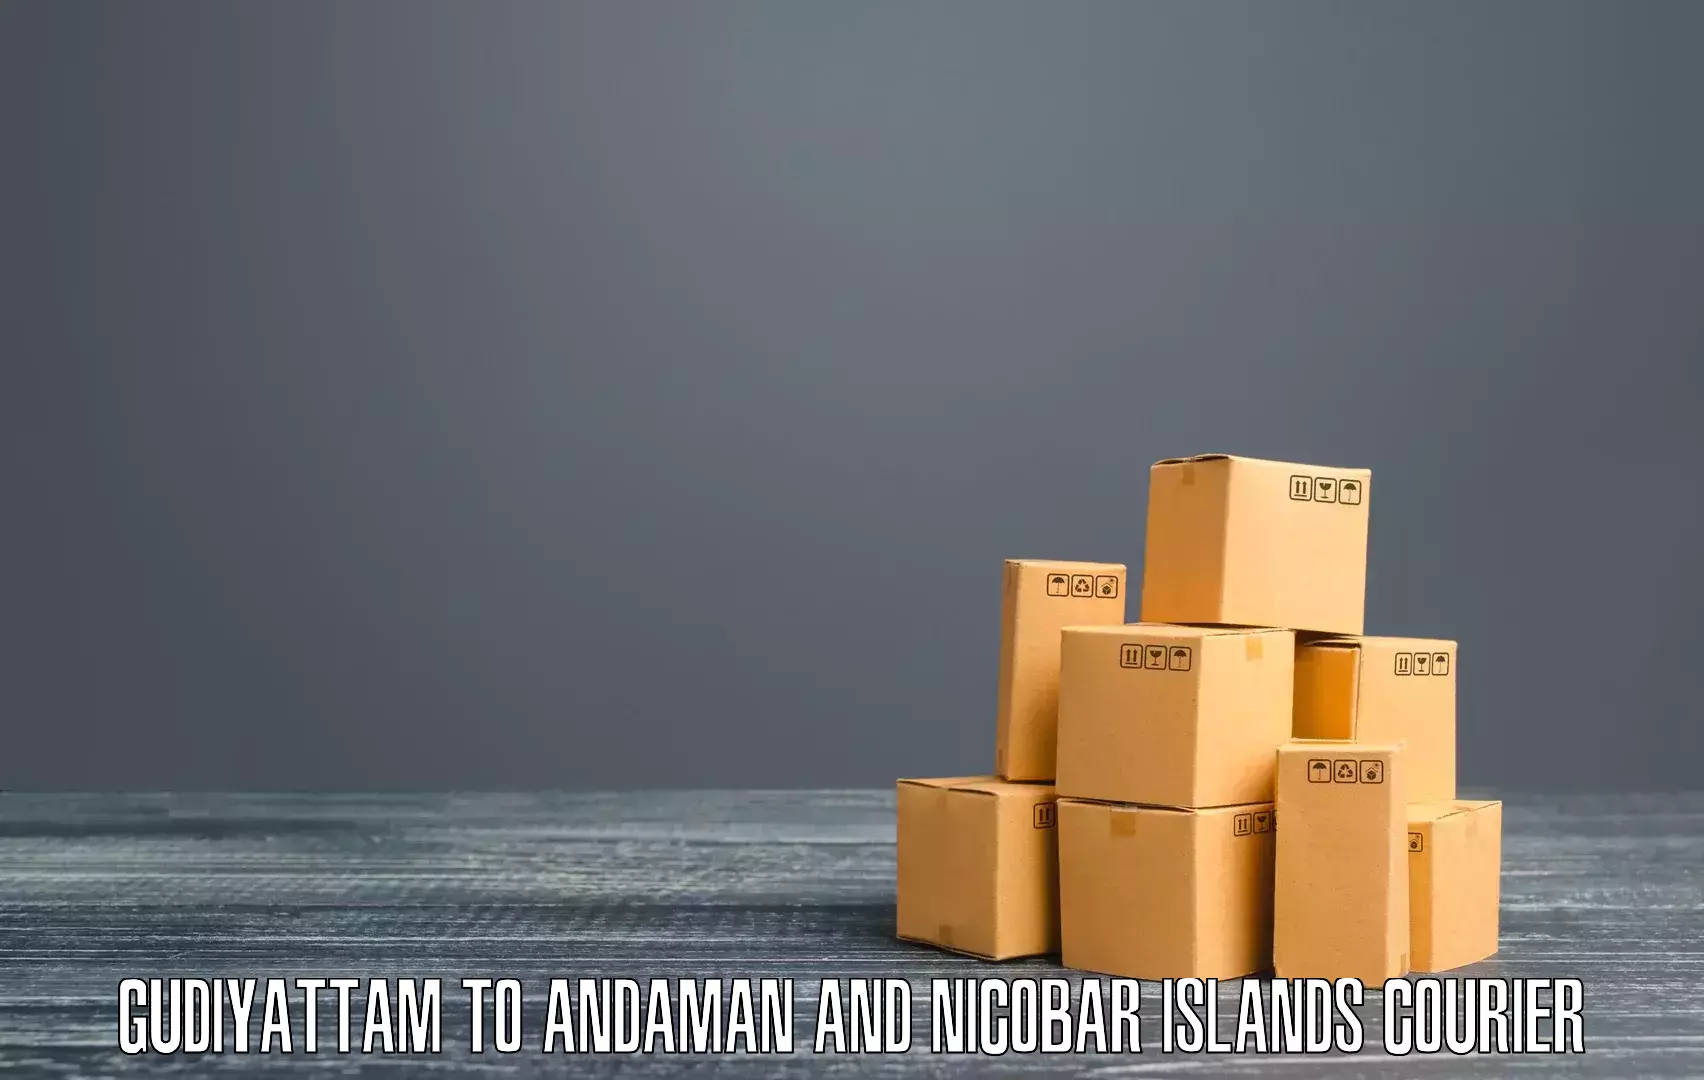 Advanced courier platforms Gudiyattam to North And Middle Andaman